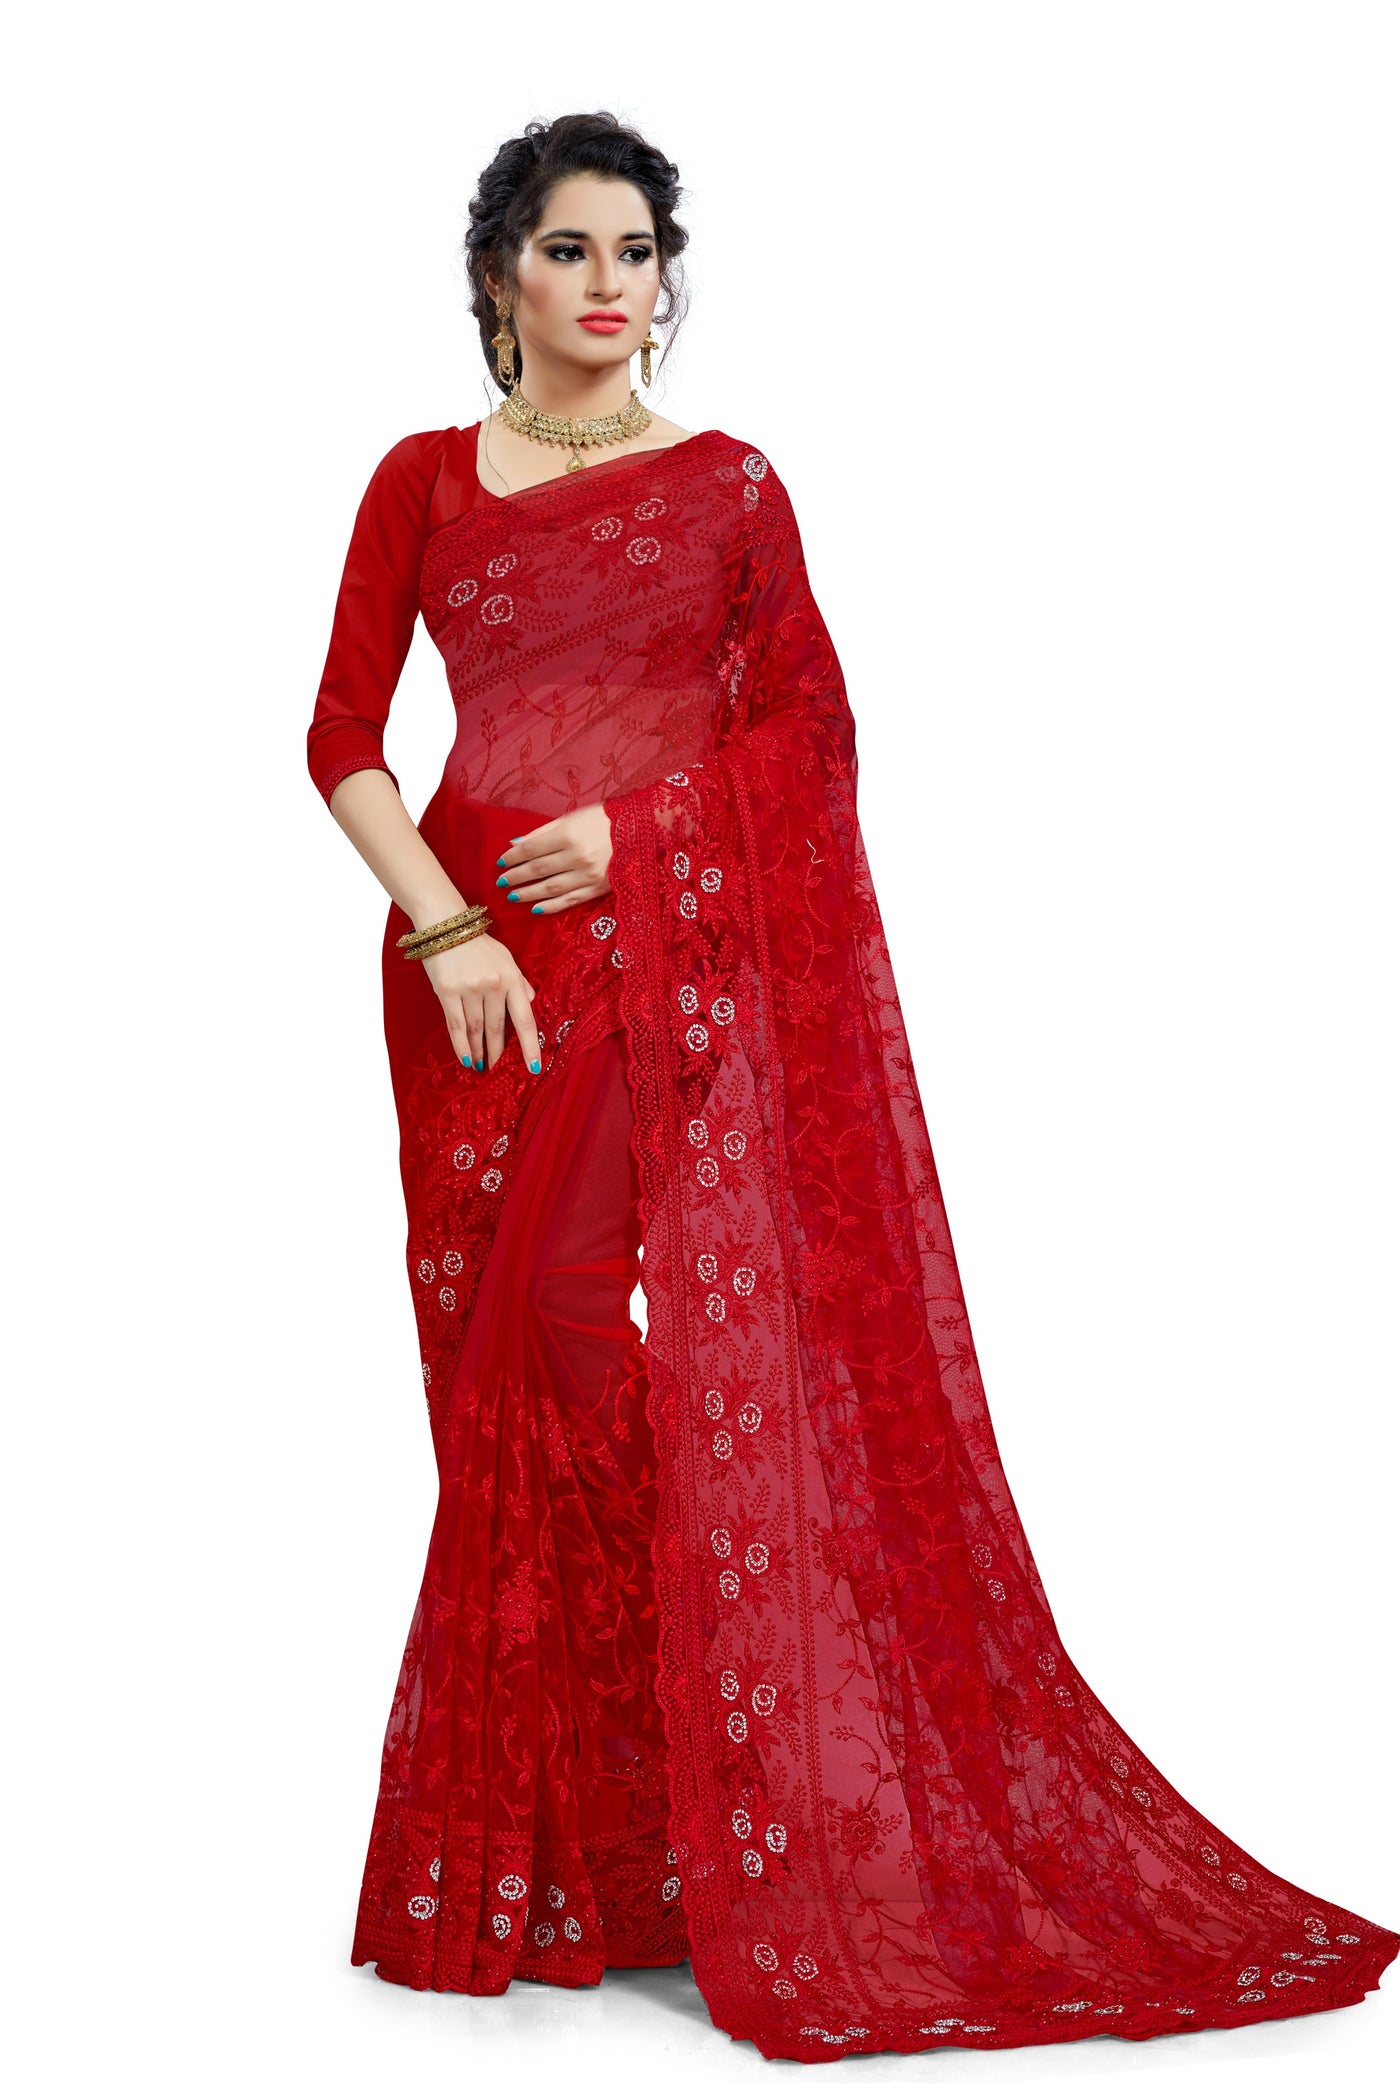 Net Red Saree With Blouse